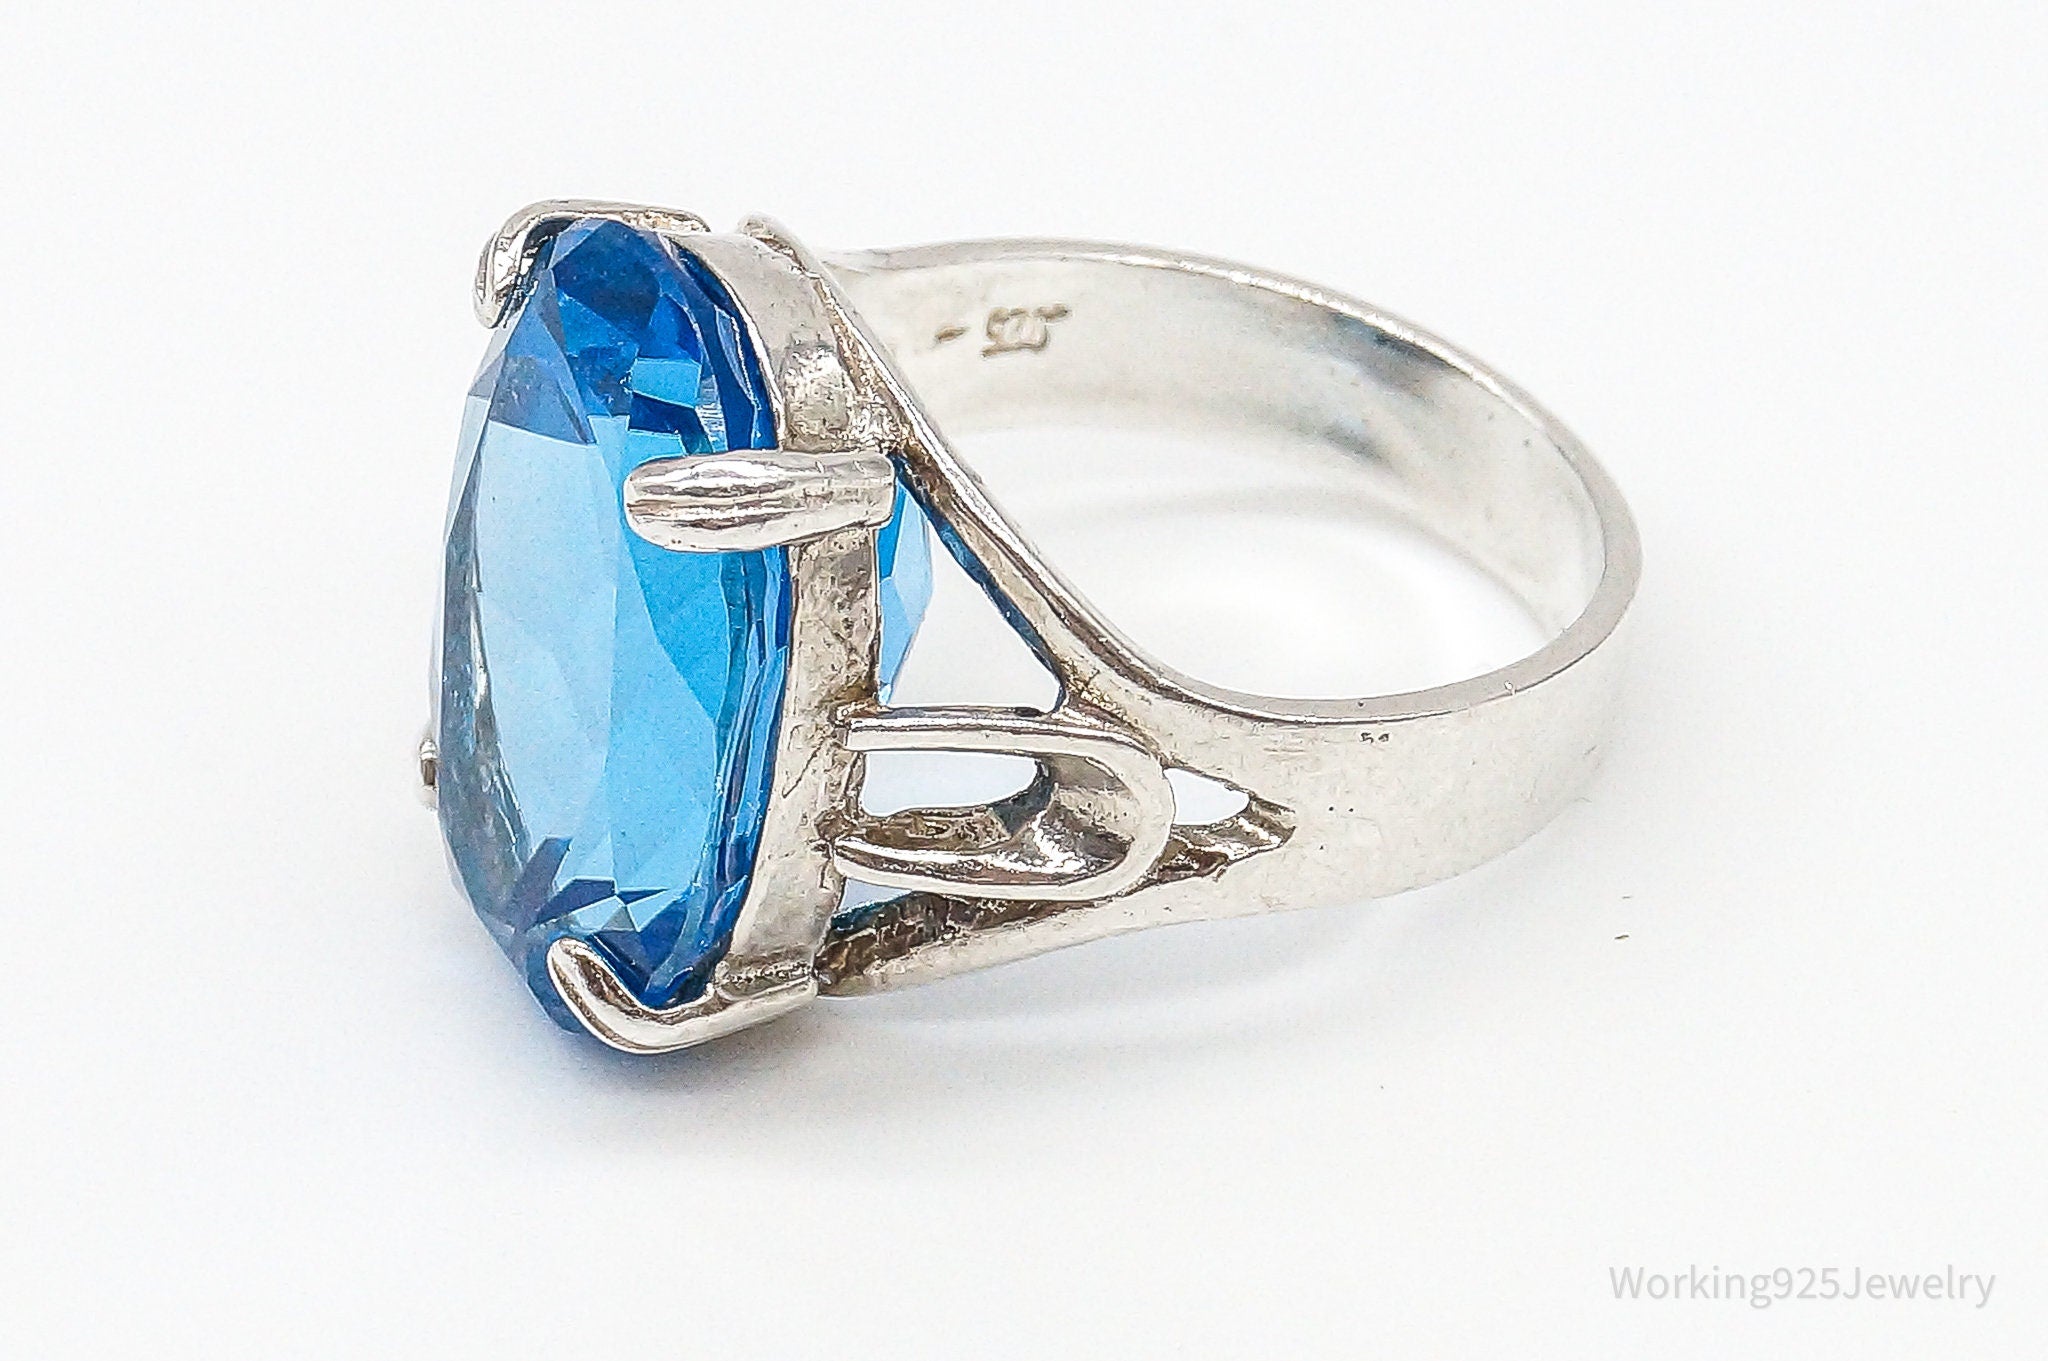 Large Blue Glass Sterling Silver Statement Ring Size 6.75